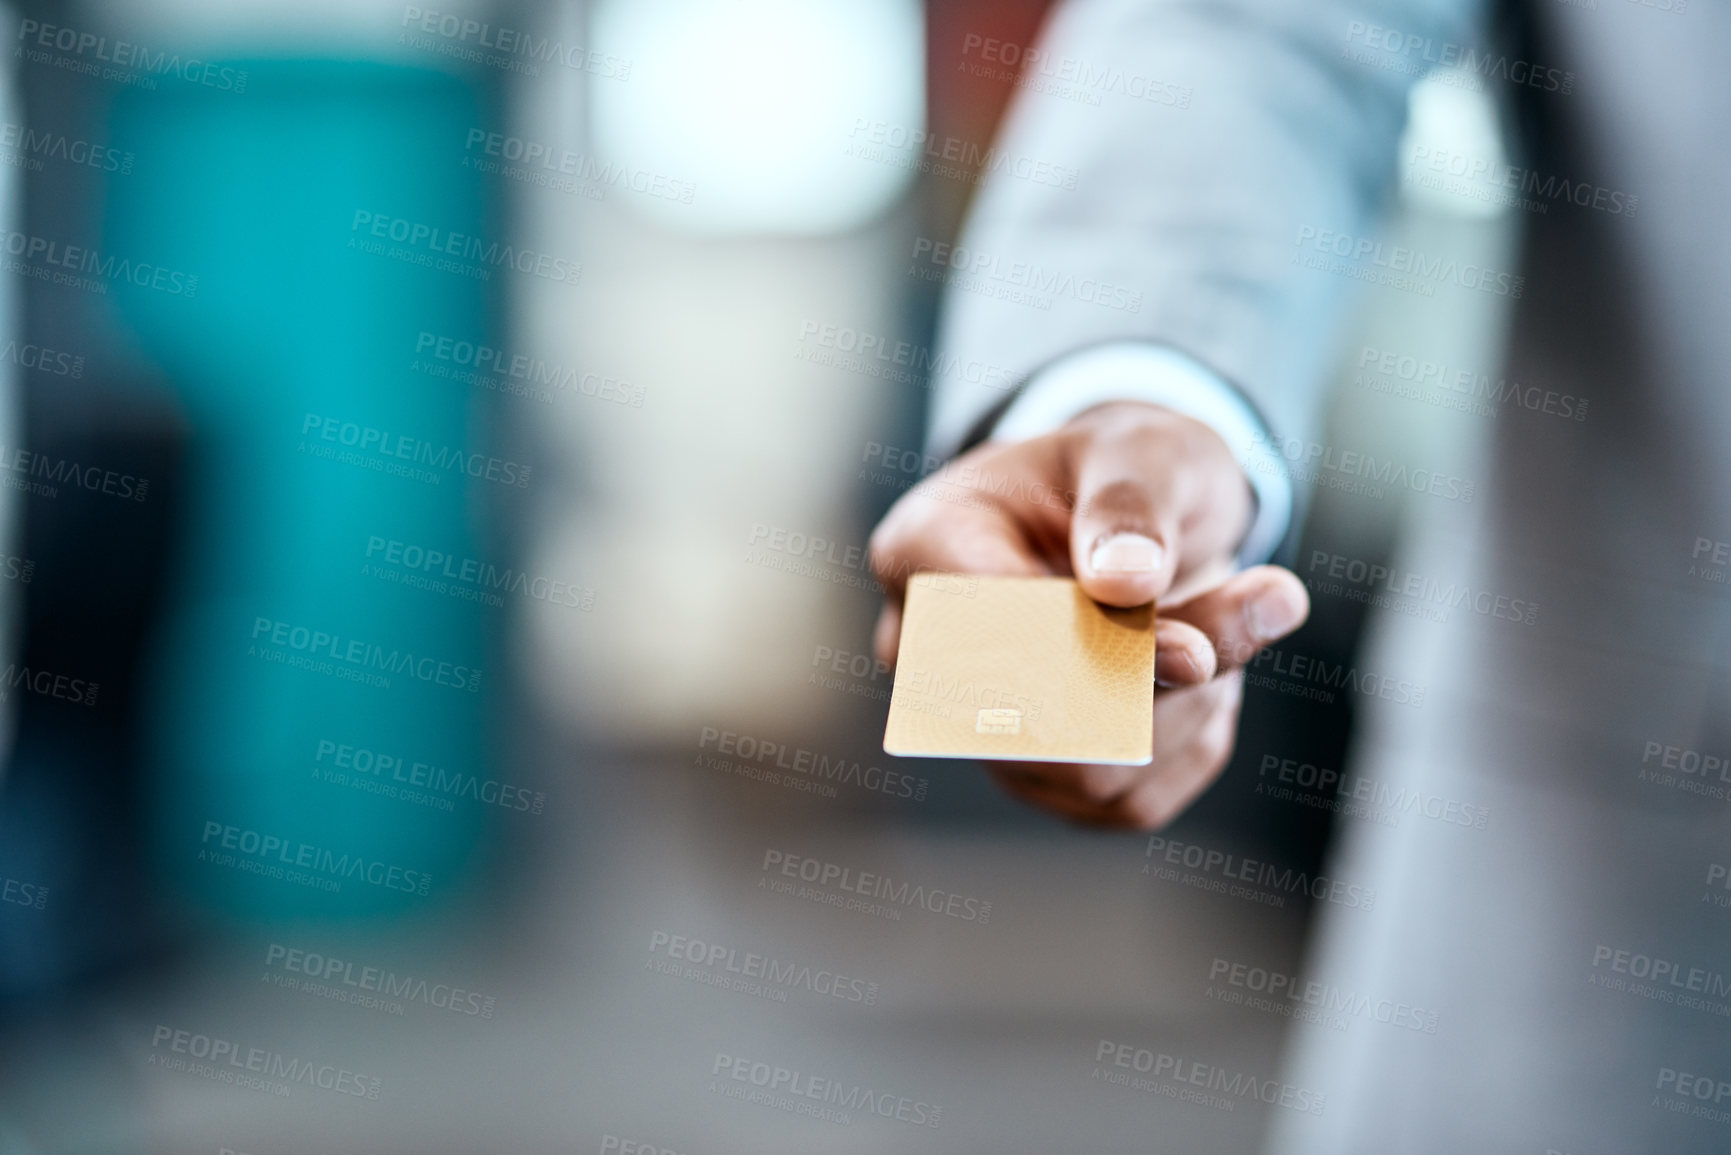 Buy stock photo Closeup shot of an unrecognizable businessman holding a credit card in an office